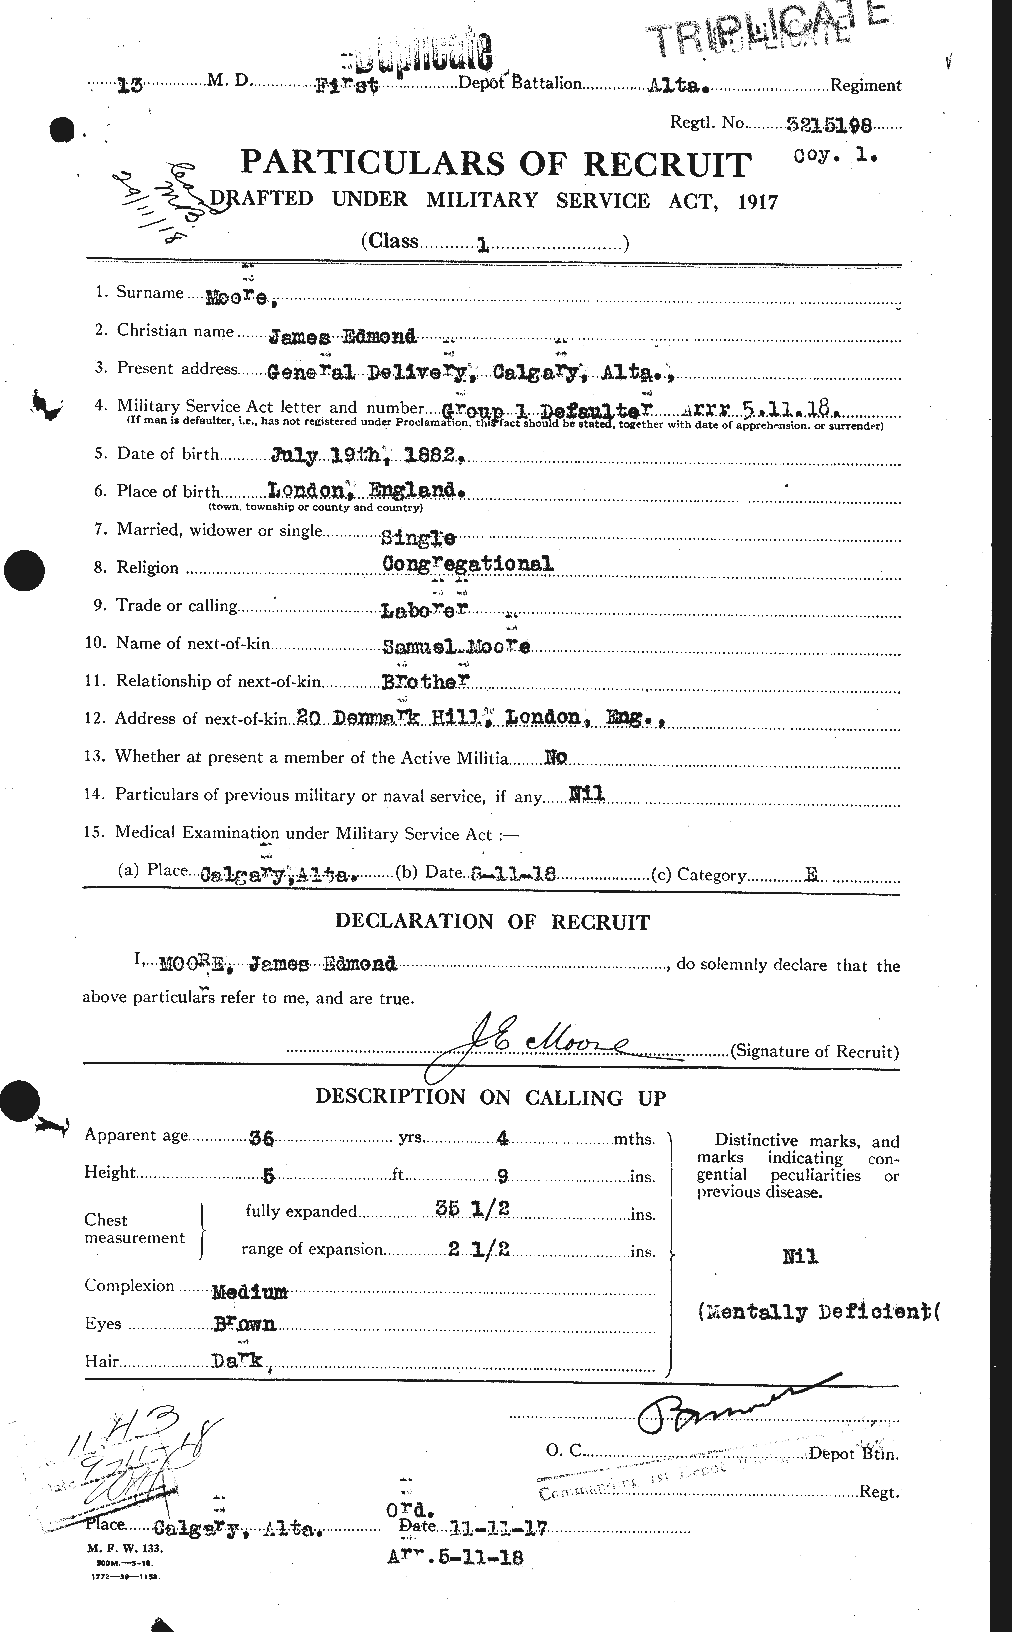 Personnel Records of the First World War - CEF 502209a